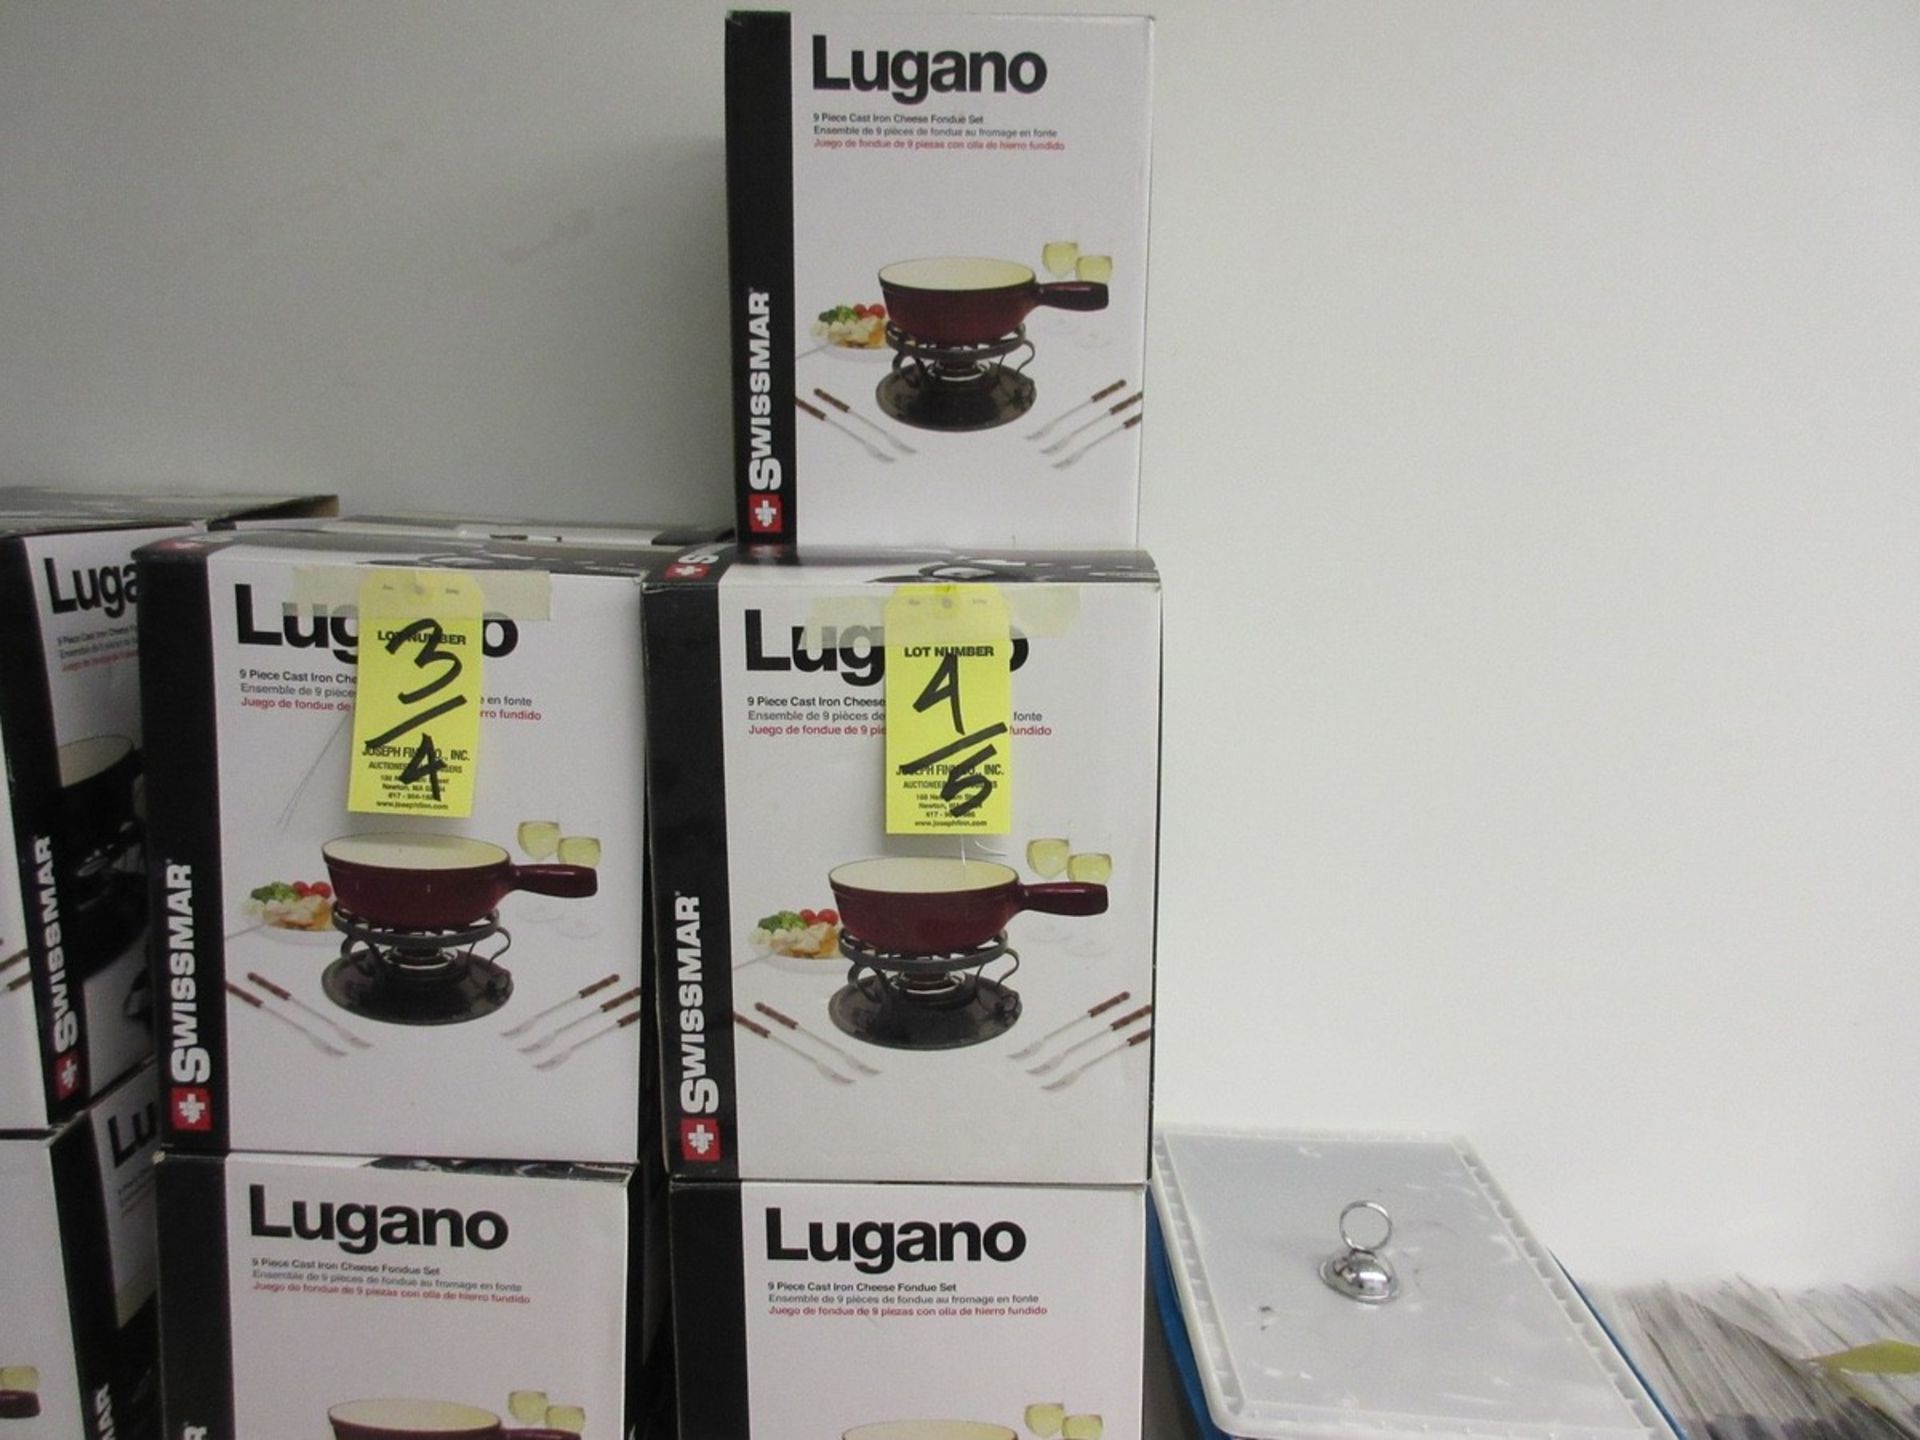 LOT (5) Lugano 9-Piece Cast Iron Cheese Fondue Sets in Boxes